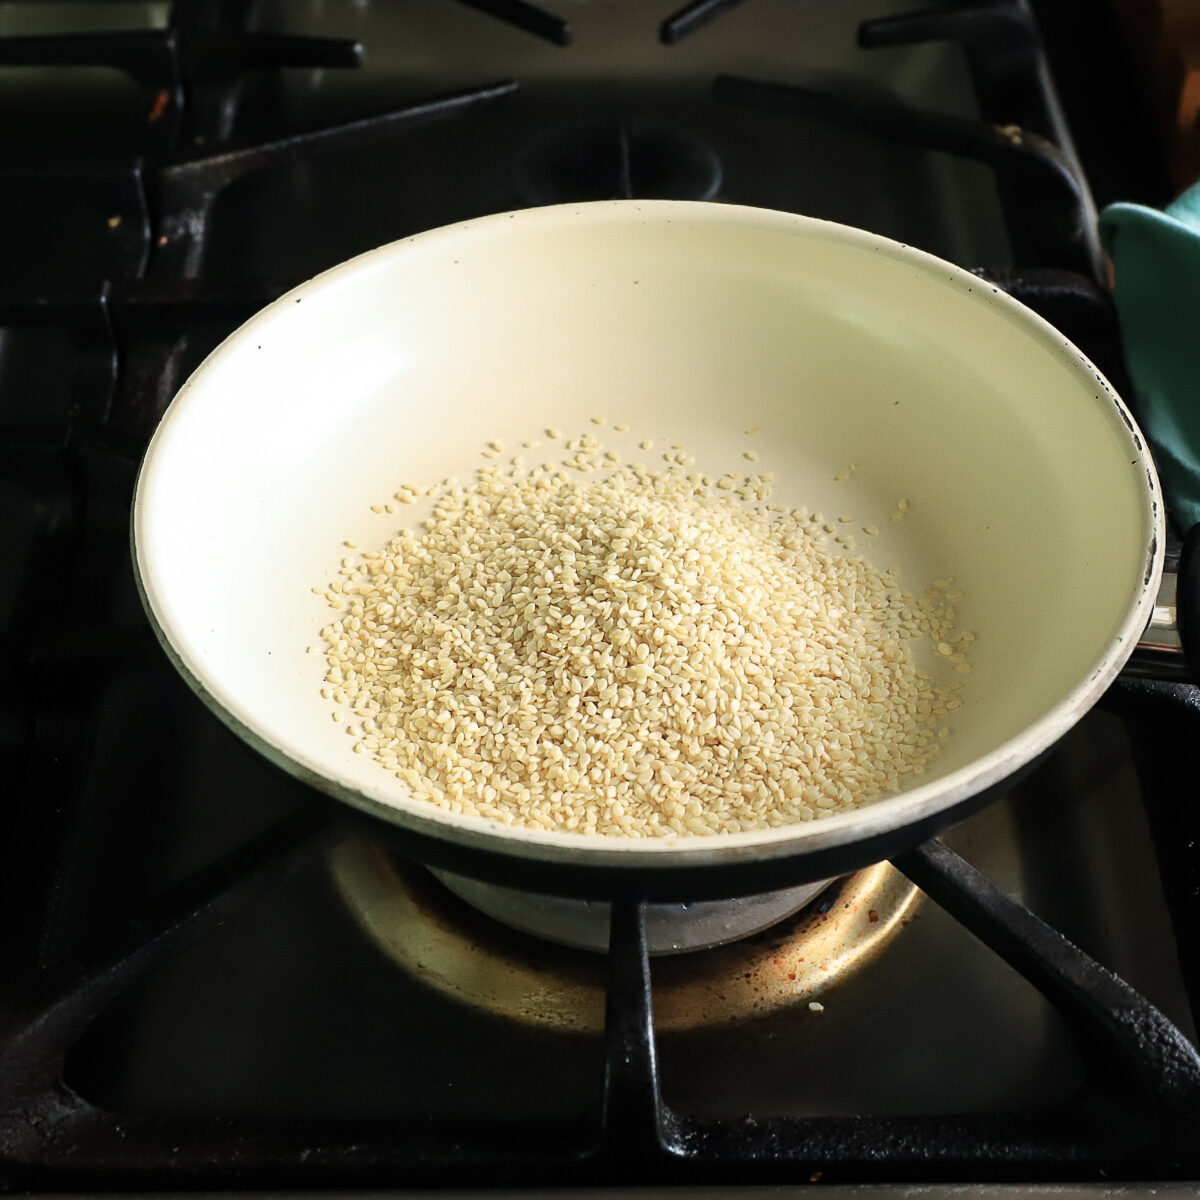 White sesame seeds in a white coated frying pan set on a stove.